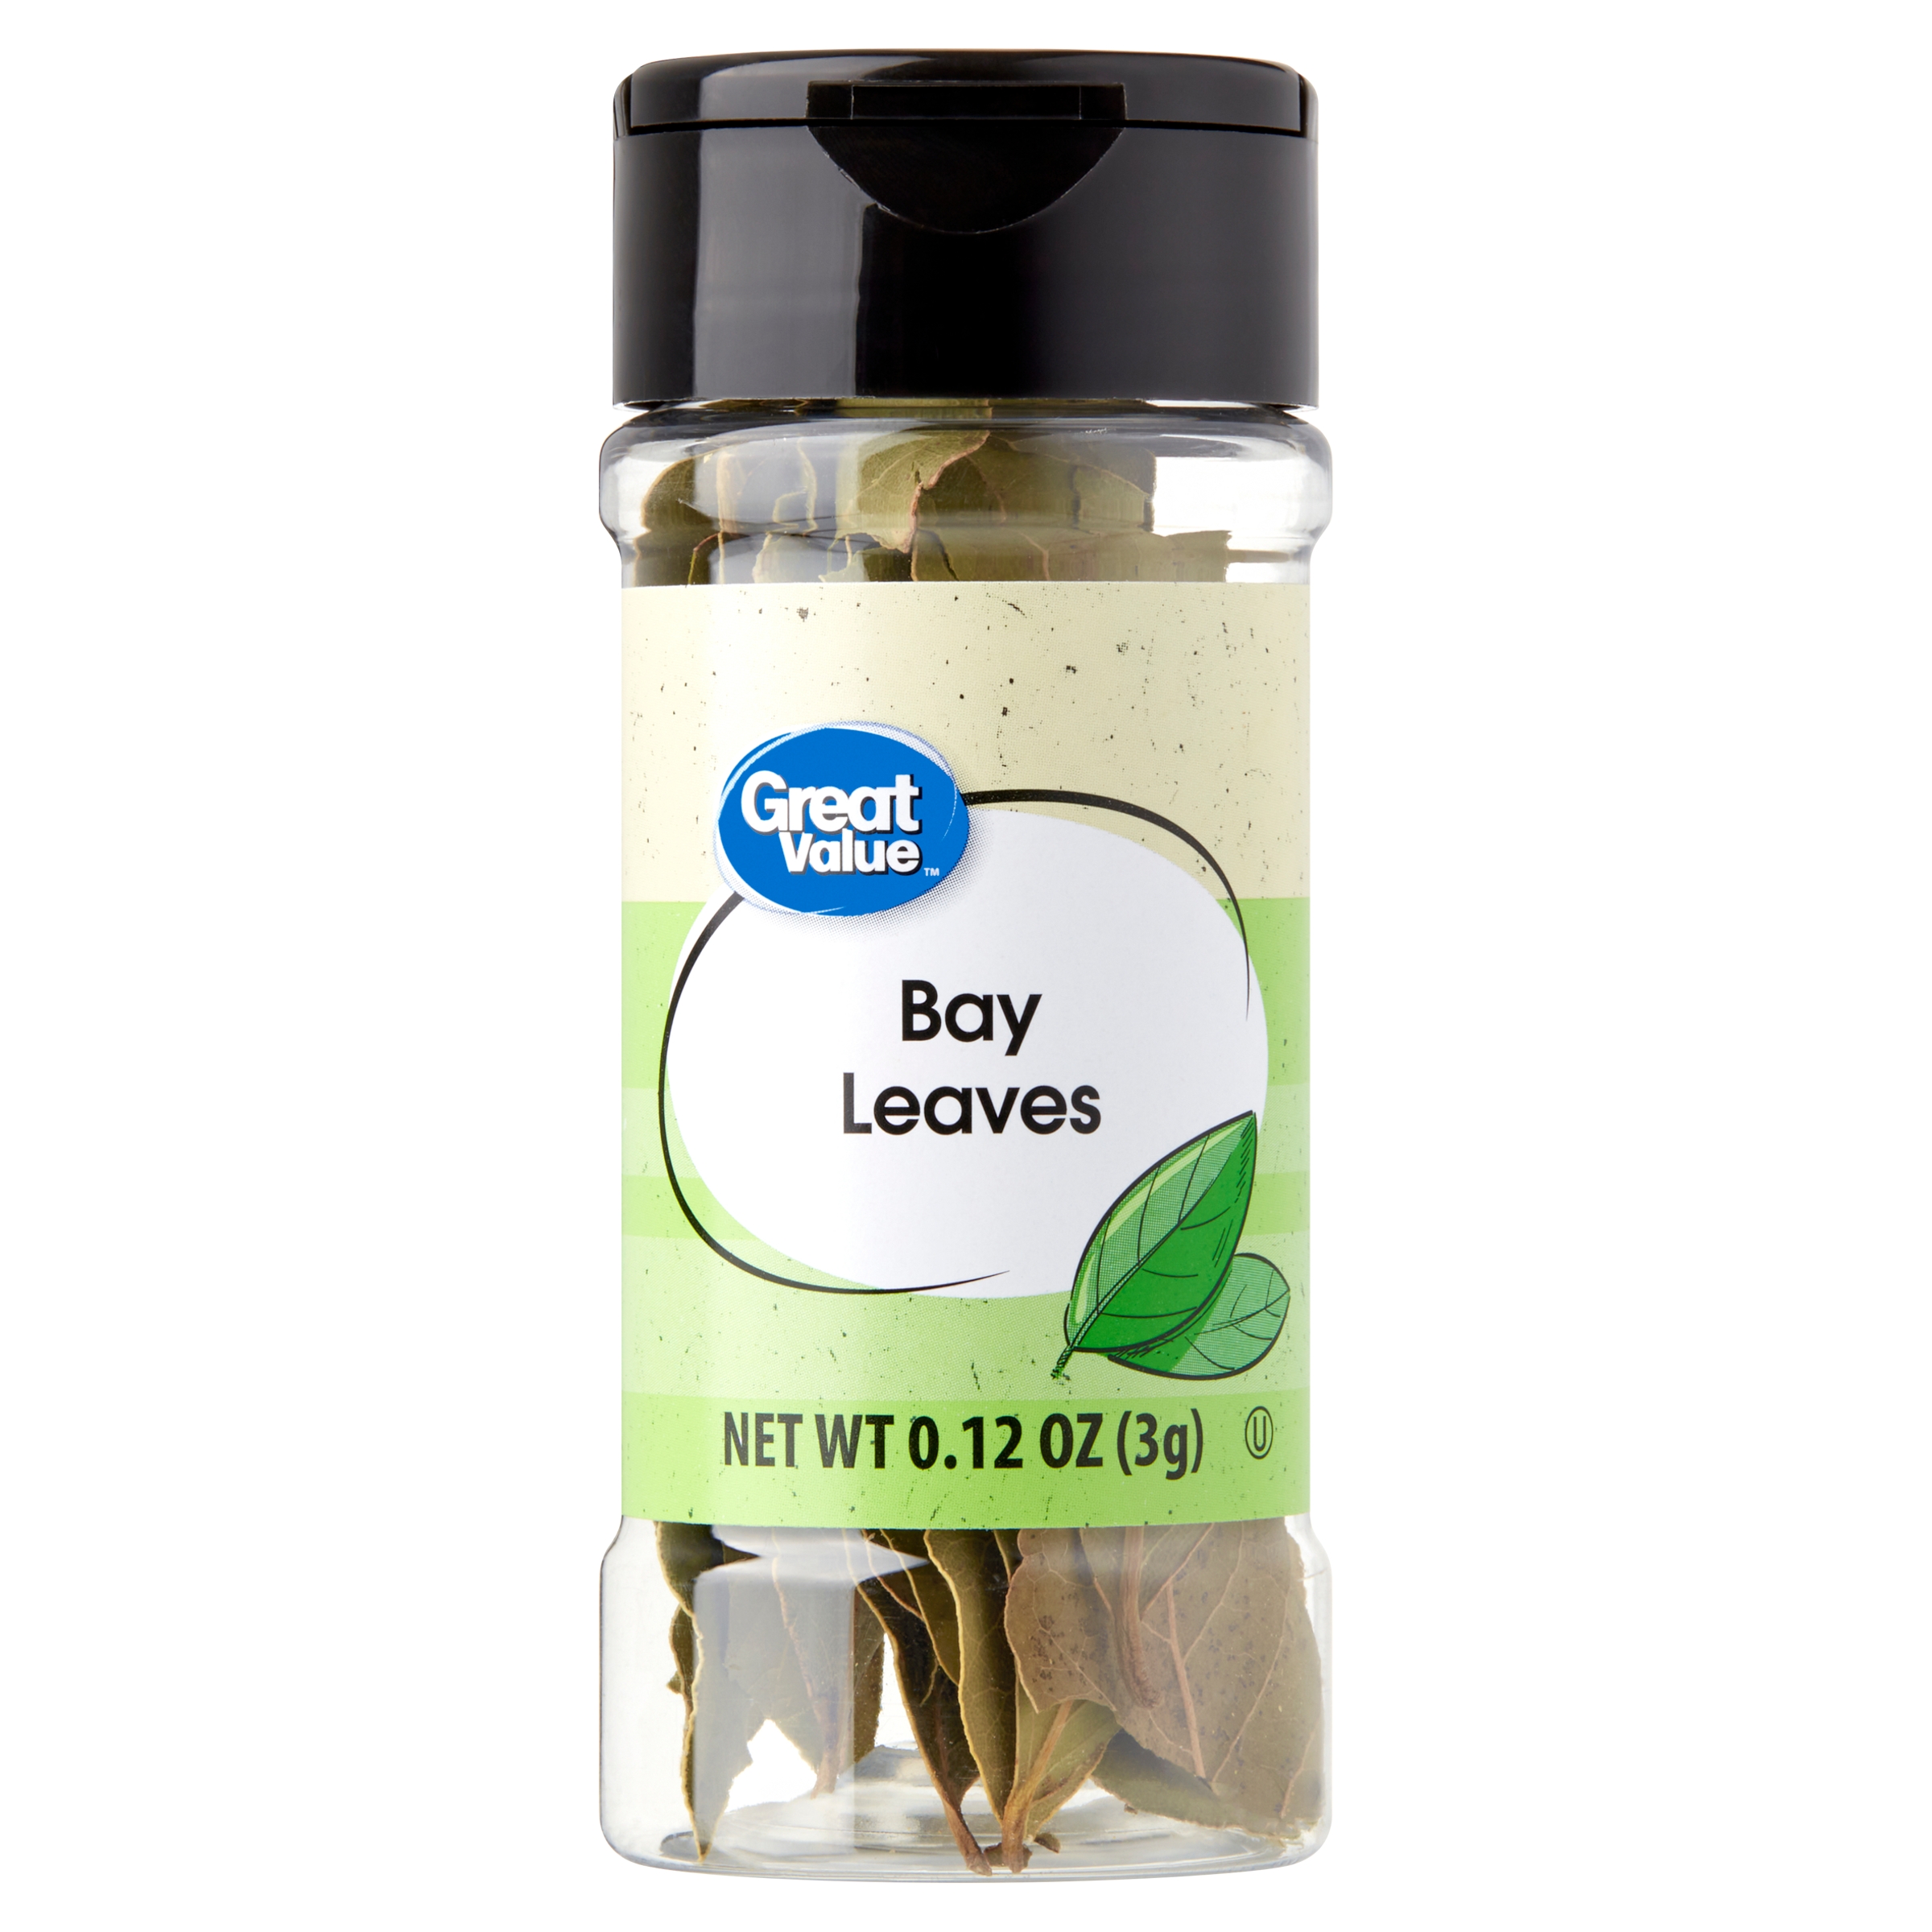 Great Value Bay Leaves, 0.12 oz - image 1 of 11